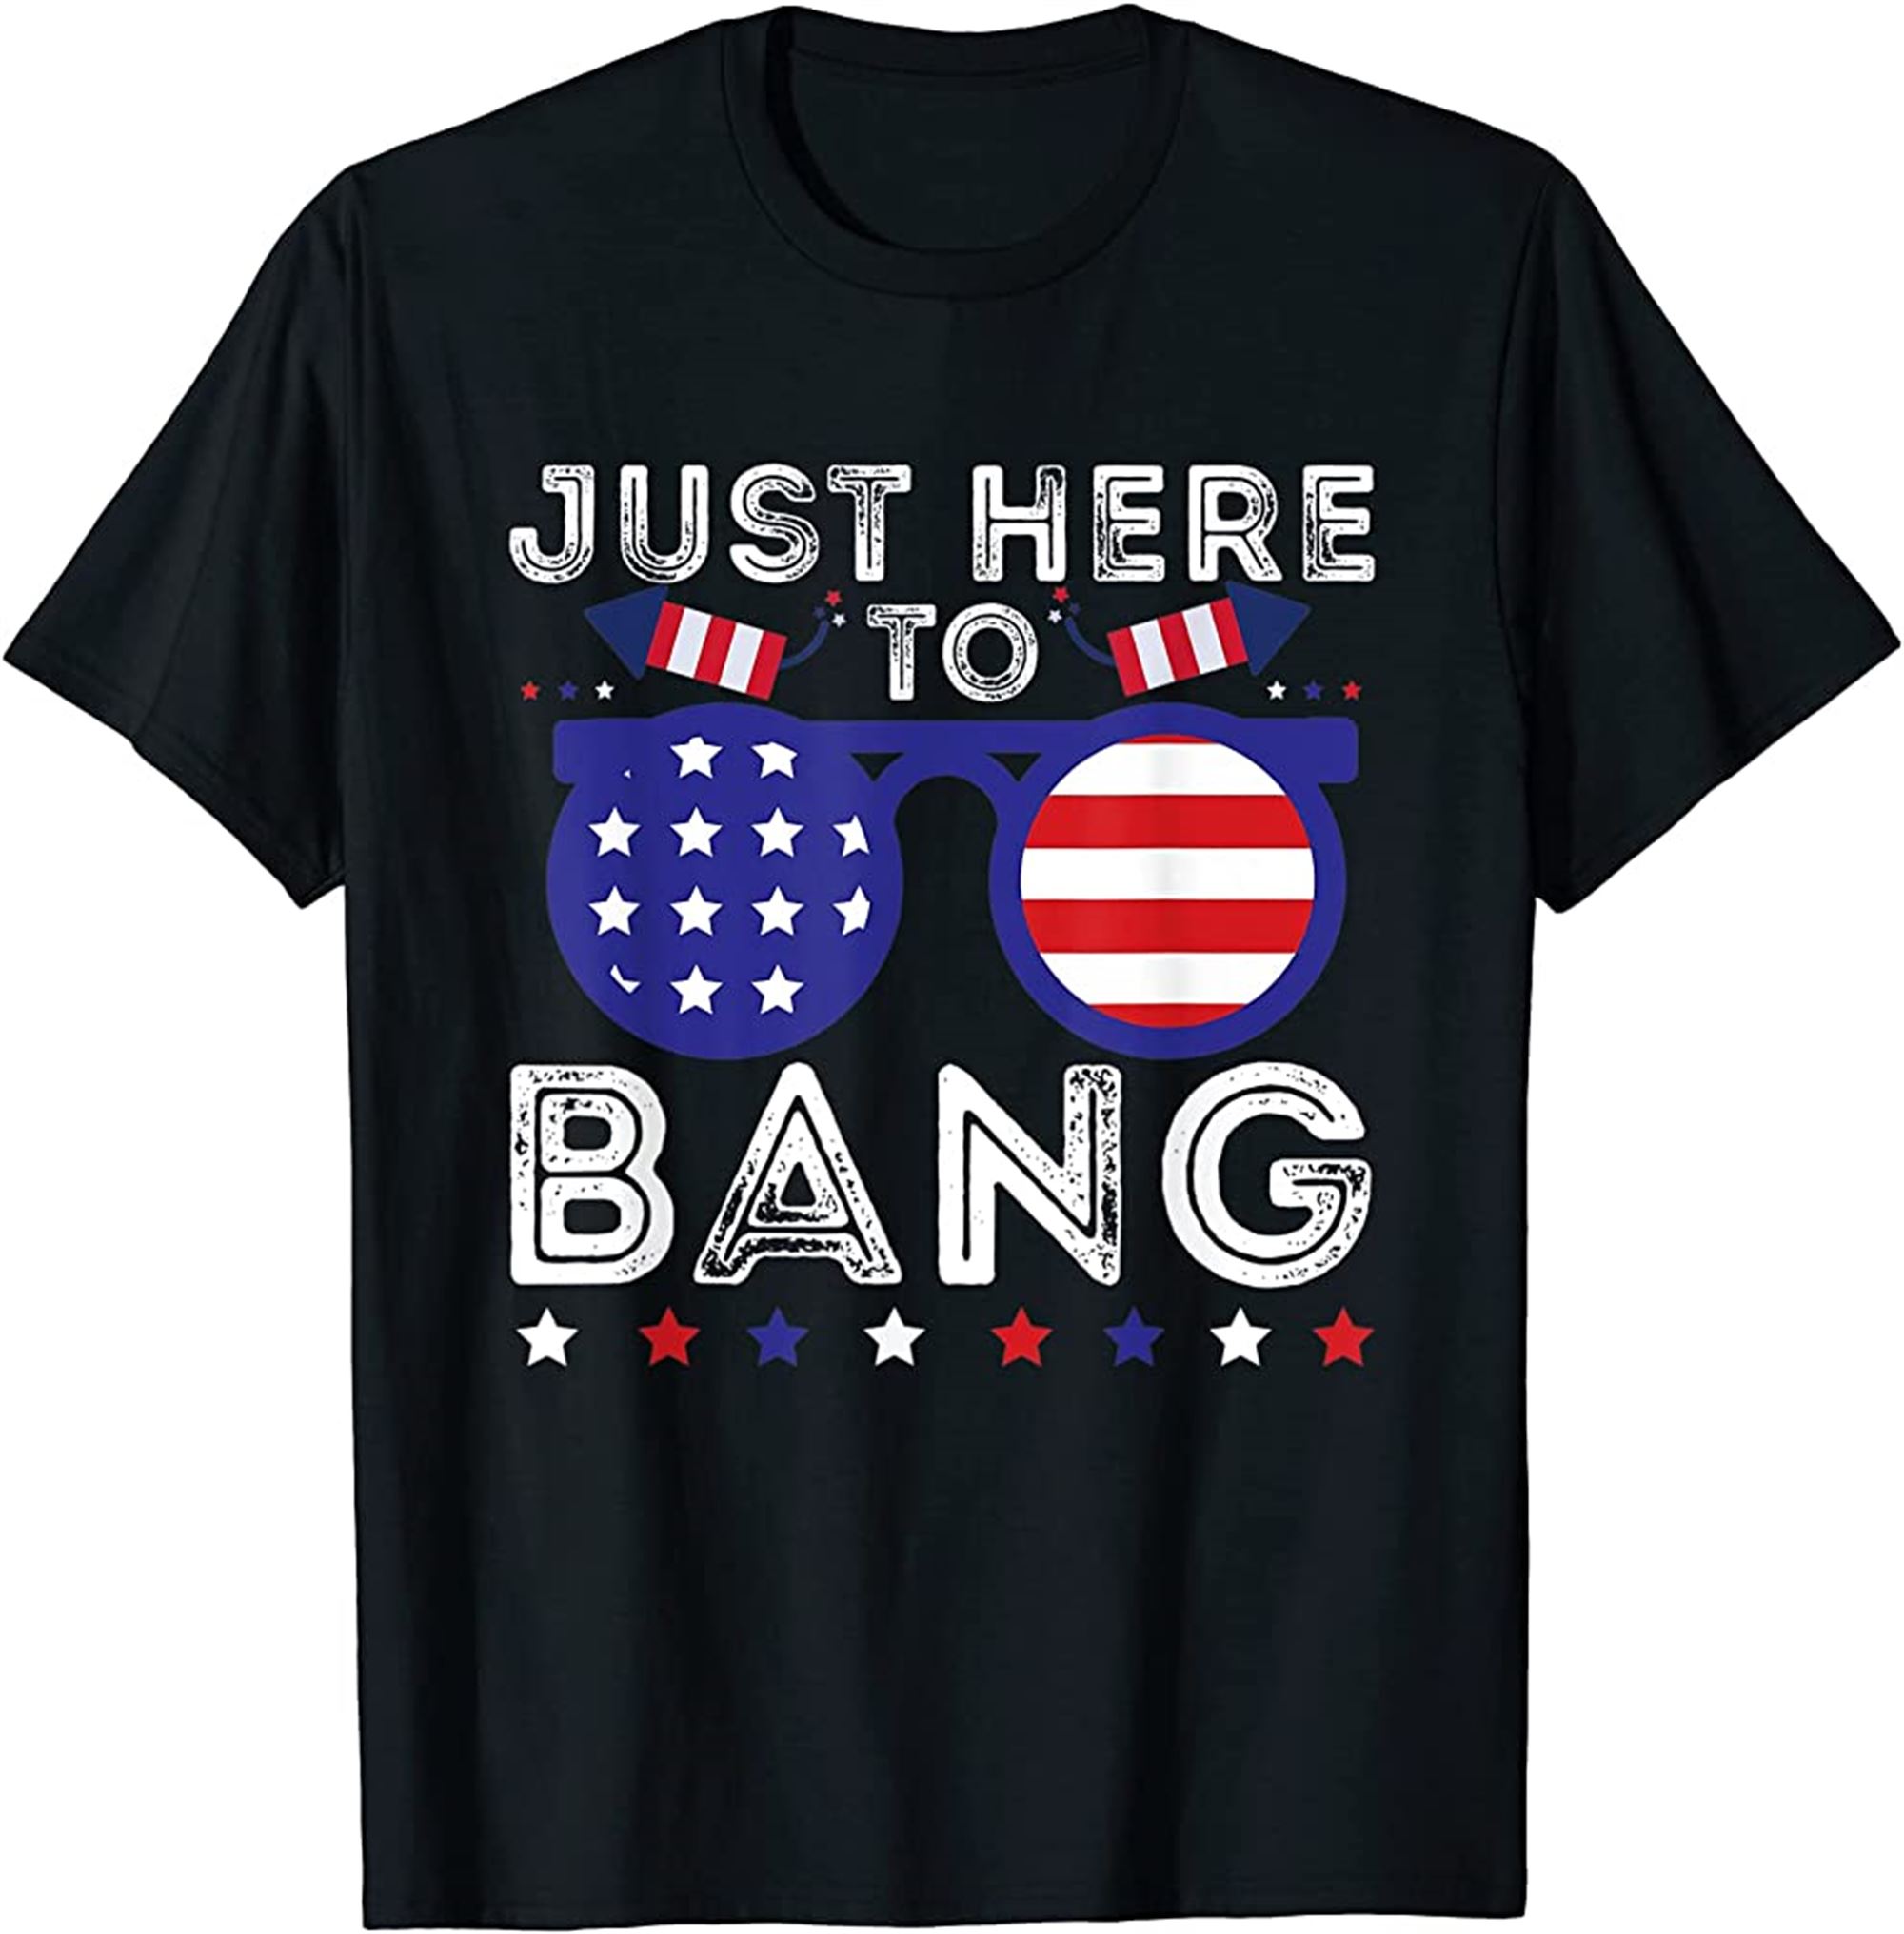 Patriotic American Pride Just Here To Bang Funny 4th Of July T-shirt Full Size Up To 5xl